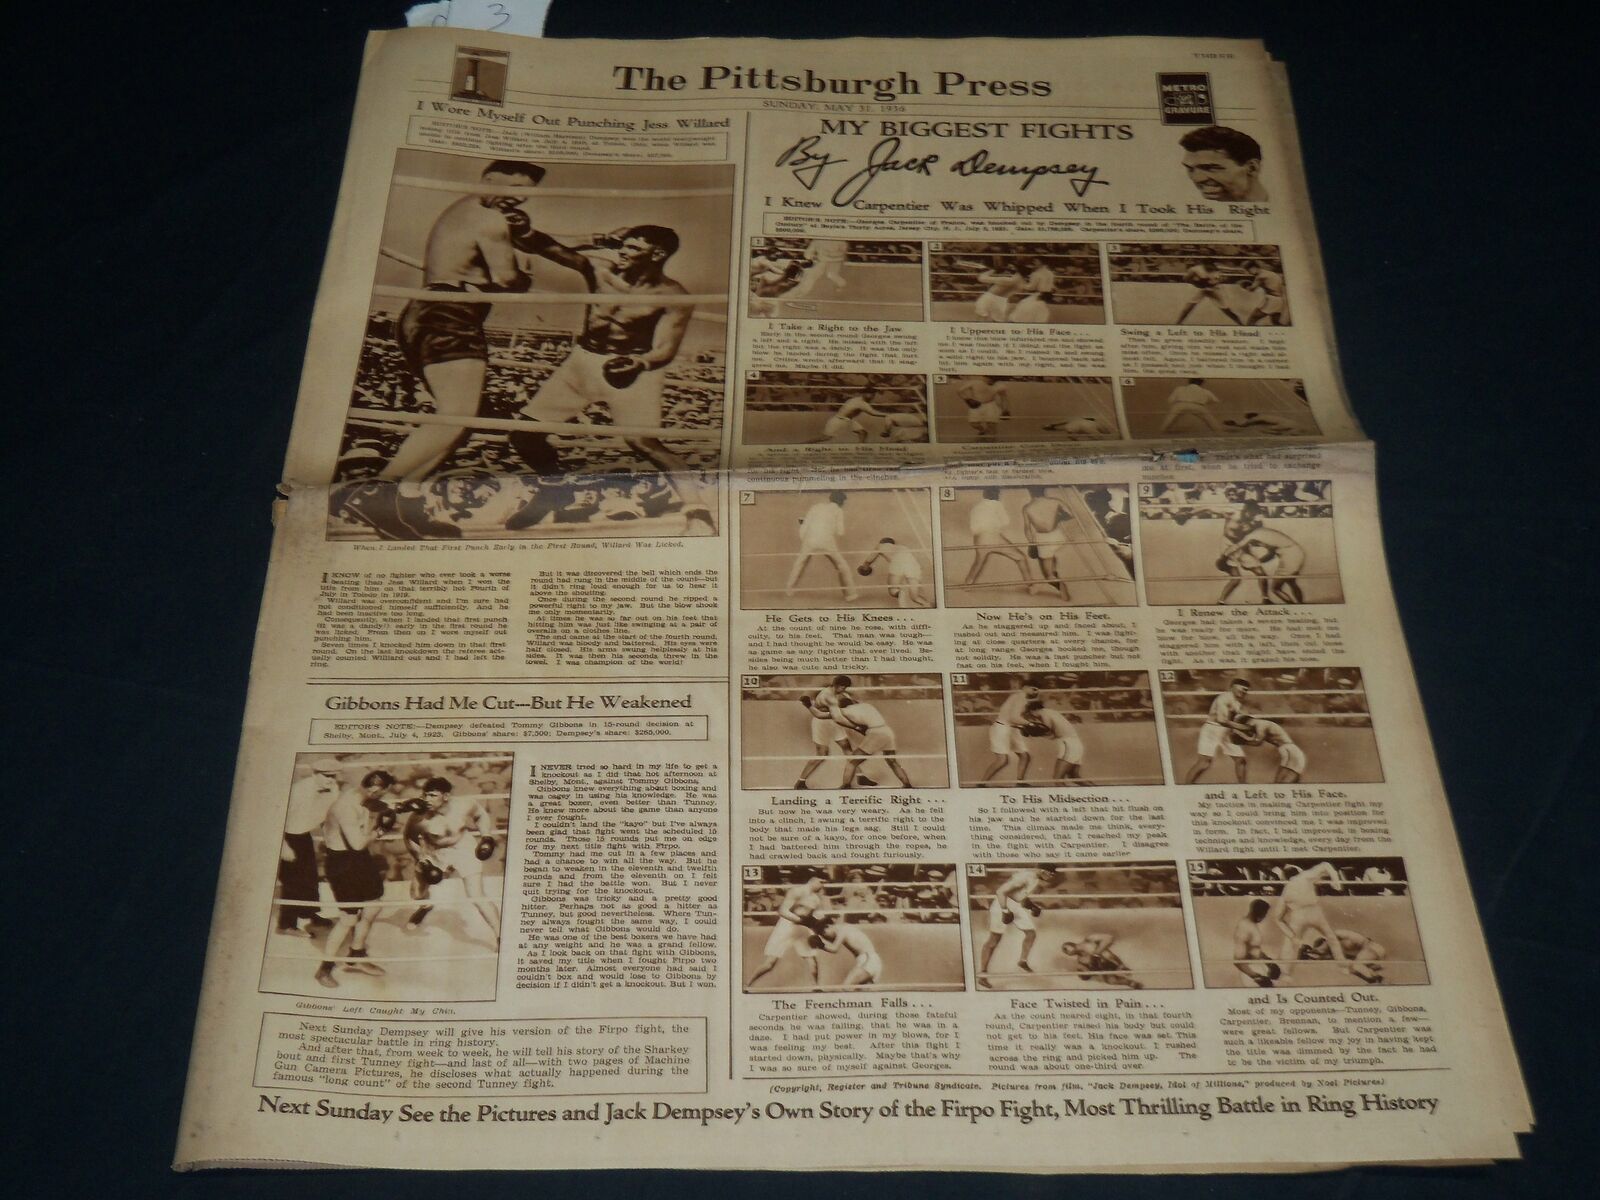 1936 MAY 31 THE PITTSBURGH PRESS SUNDAY GRAVURE- DEMPSEY BIGGEST FIGHTS- NP 4540